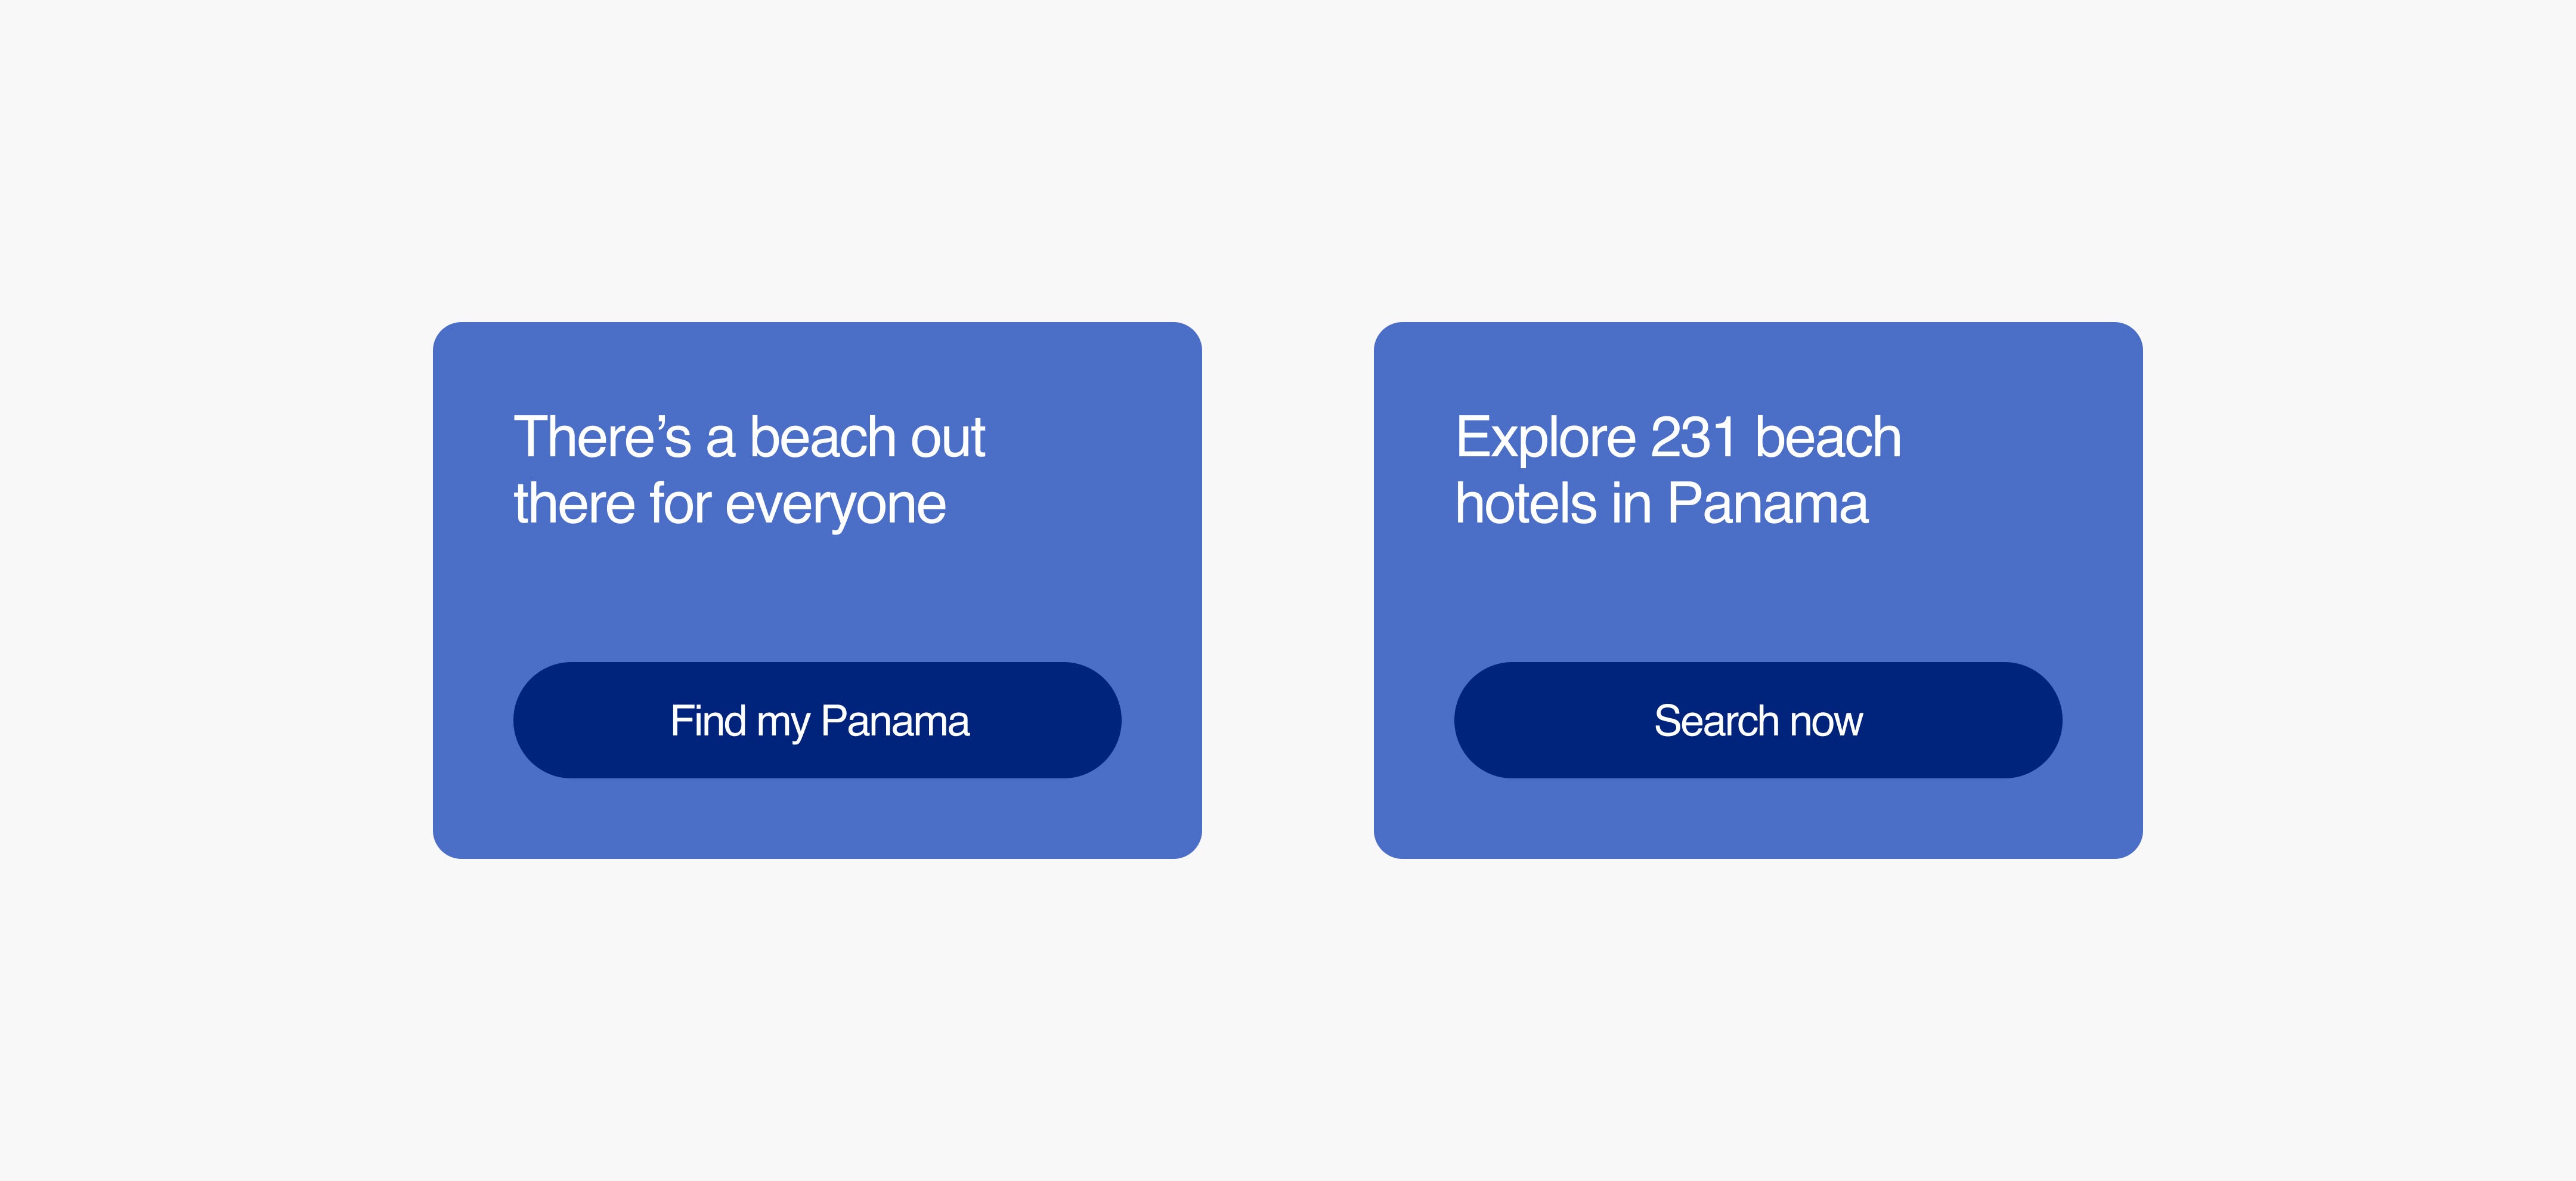 One screen says “There’s a beach out there for everyone” with the CTA “Find my Panama.” The other screen says ‘Explore 231 beach hotels in Panama” with the CTA “Search now.”